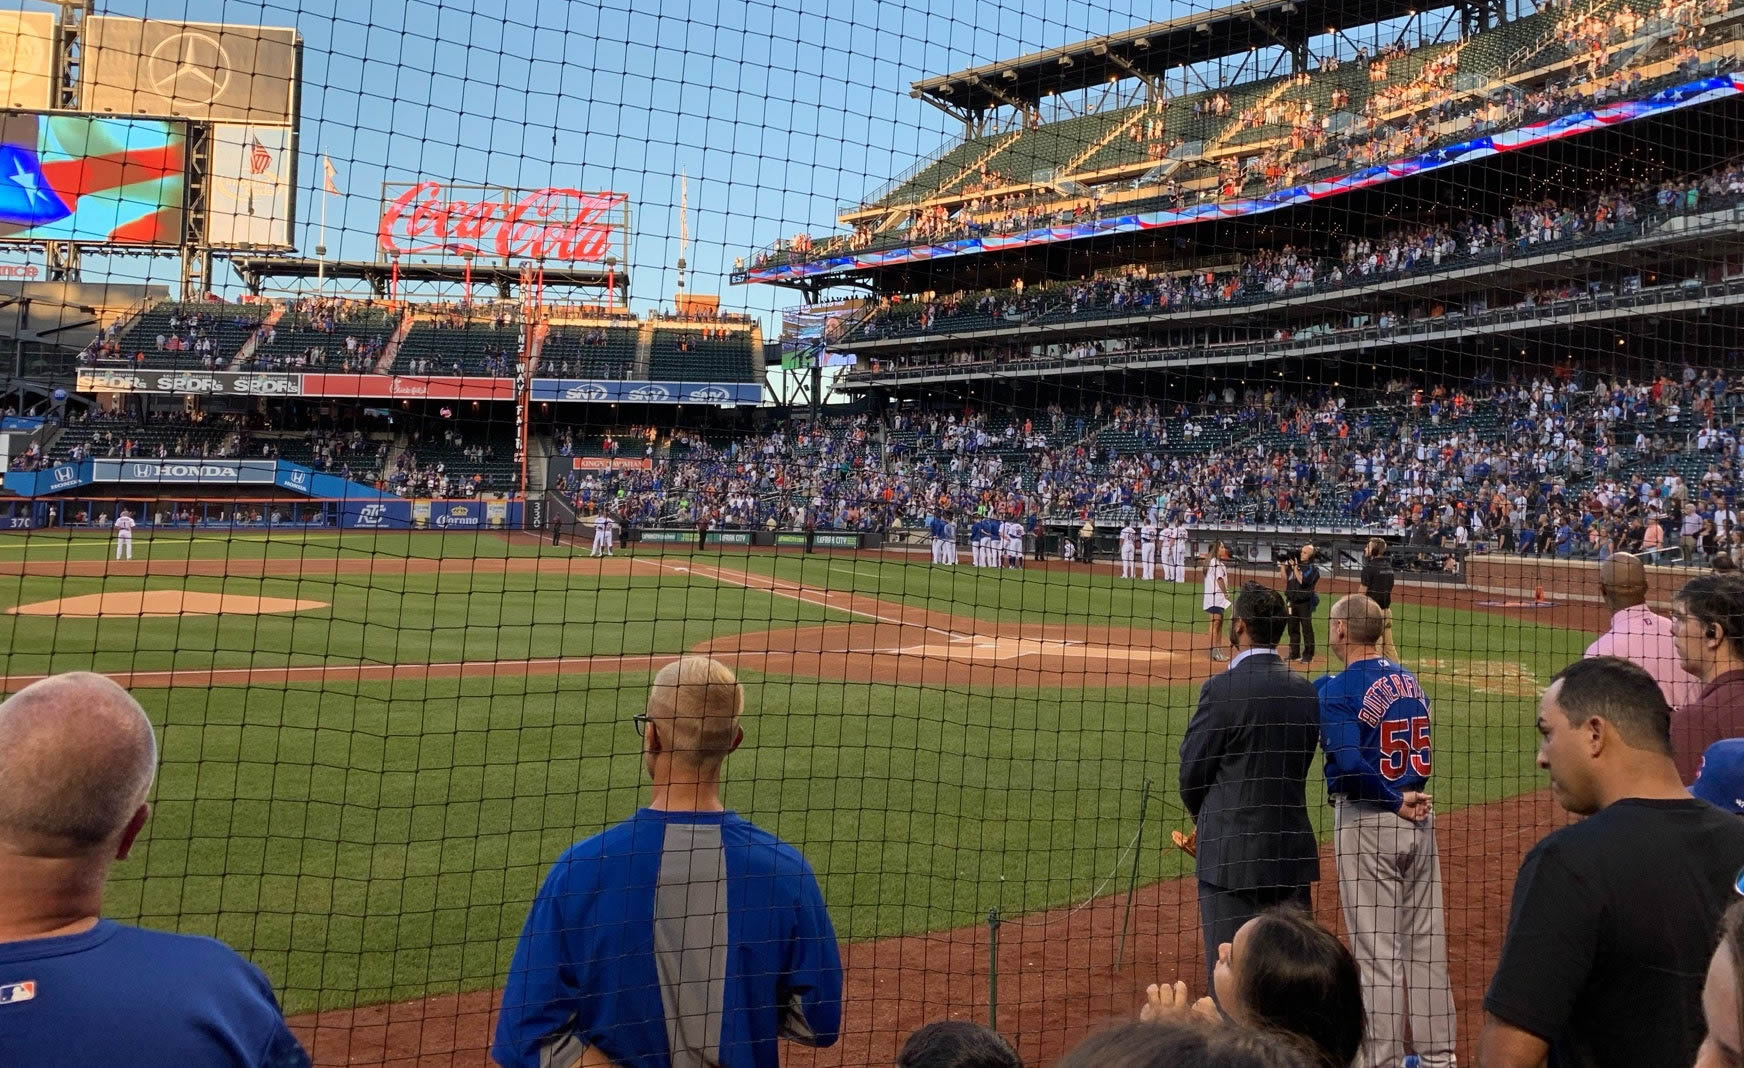 section 19, row 3 seat view  - citi field